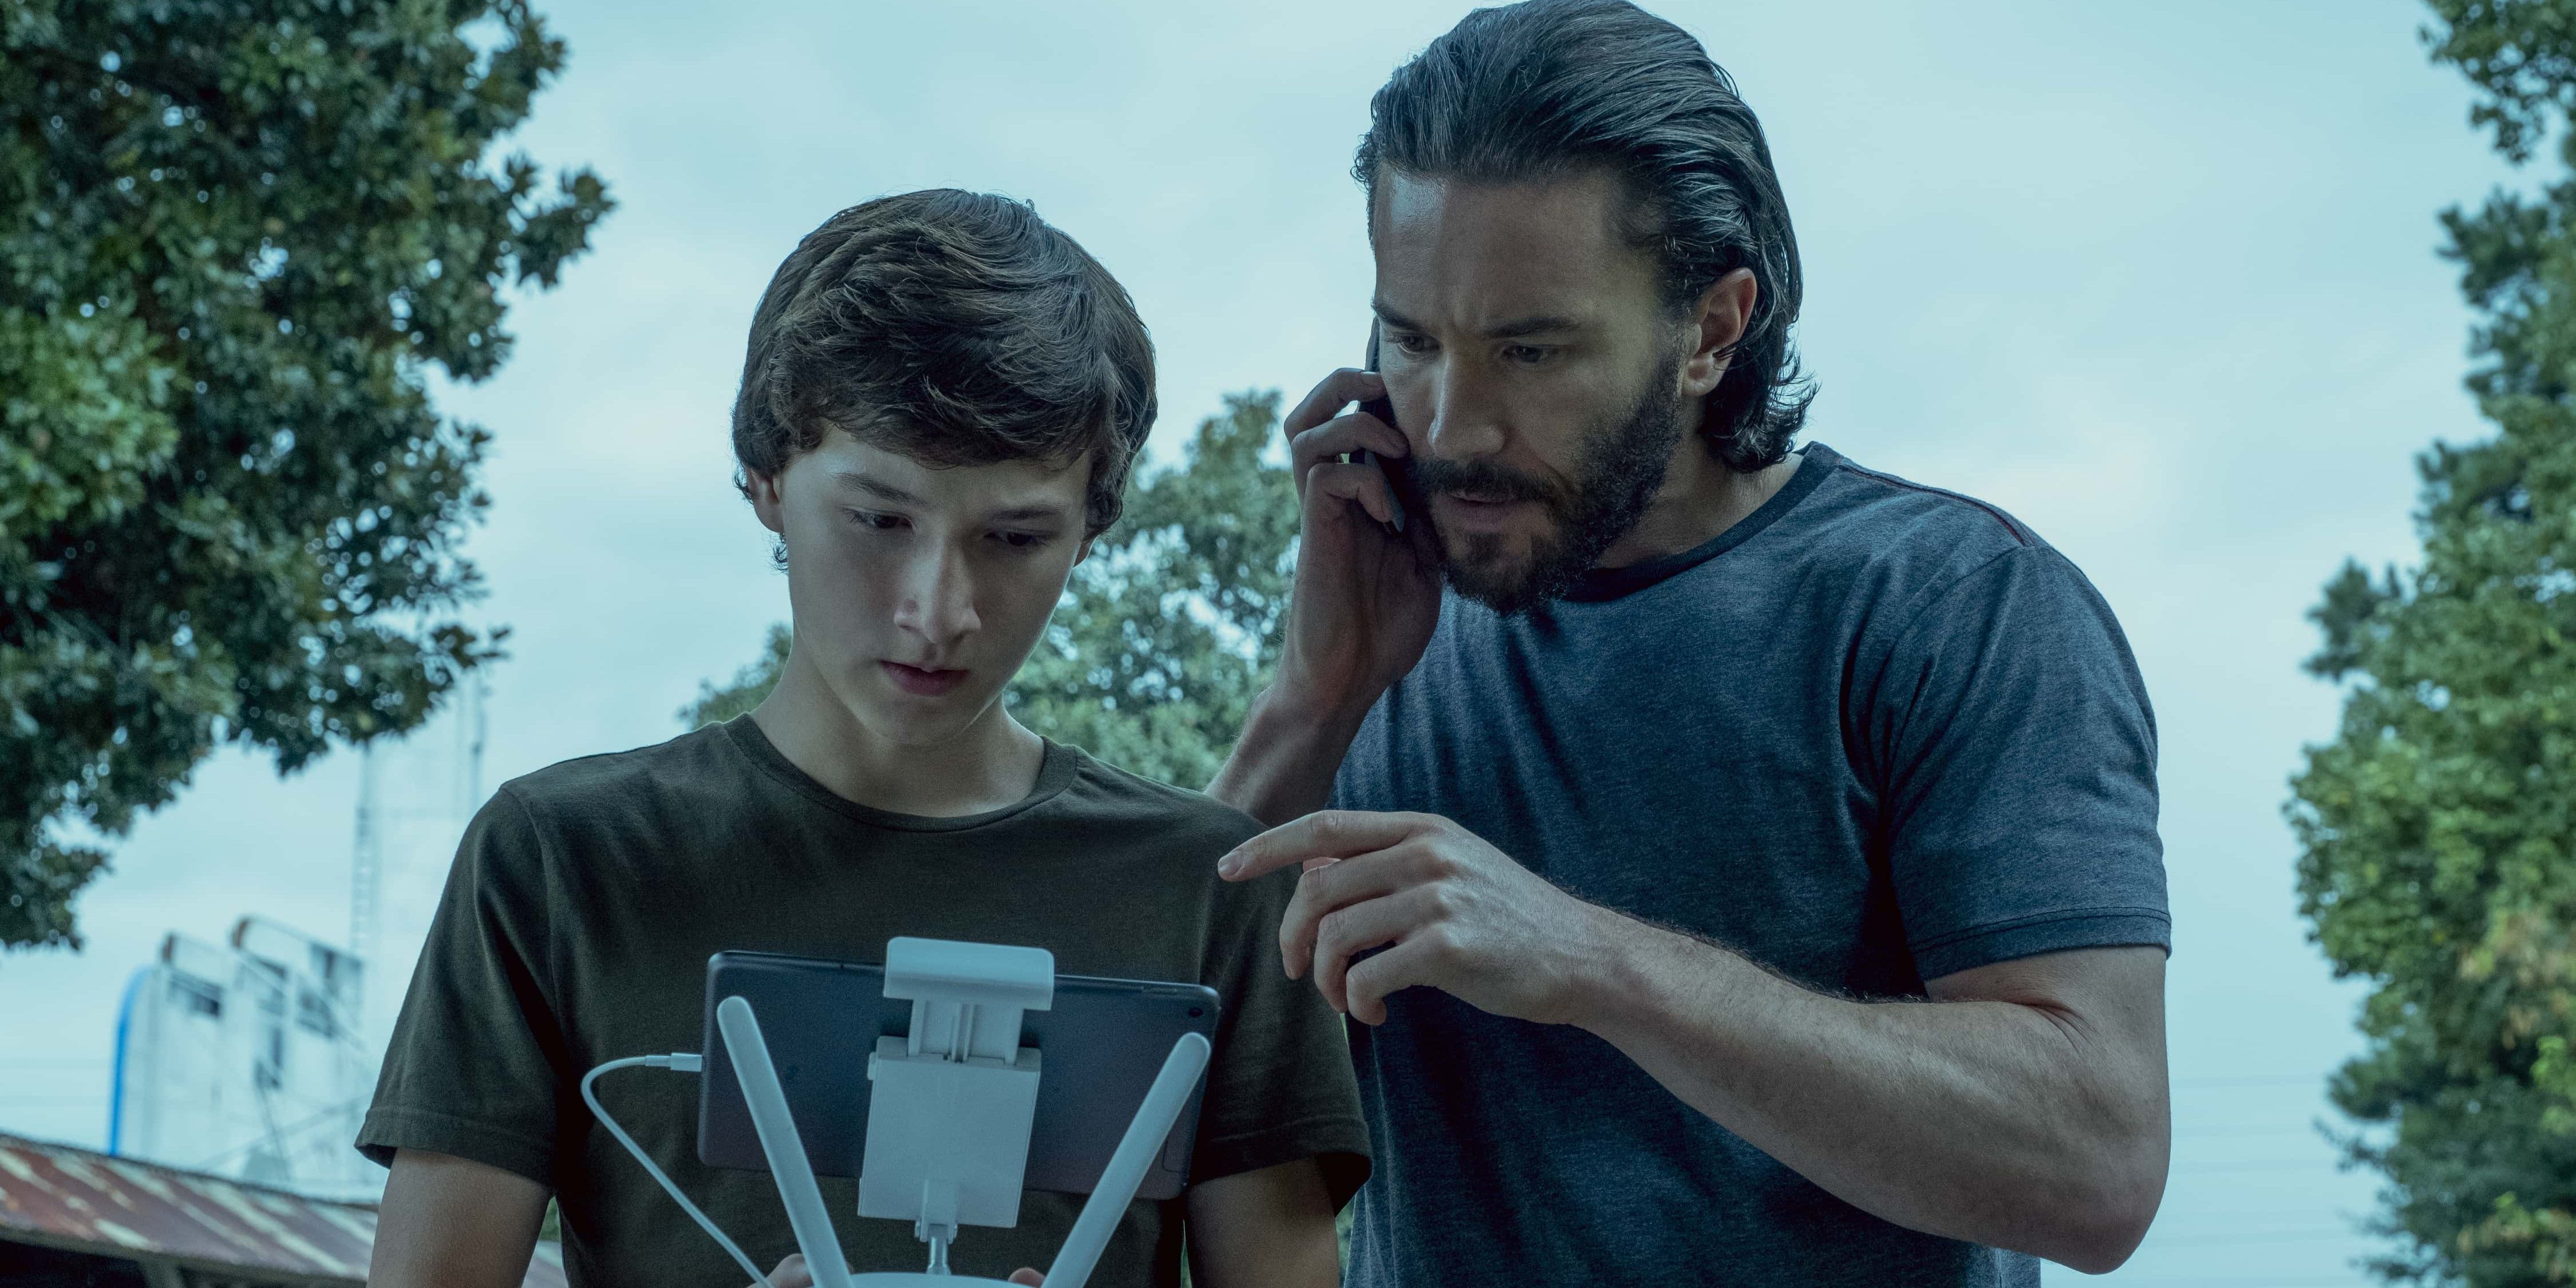 Jonah teaches Ben how to operate a drone in Ozark.